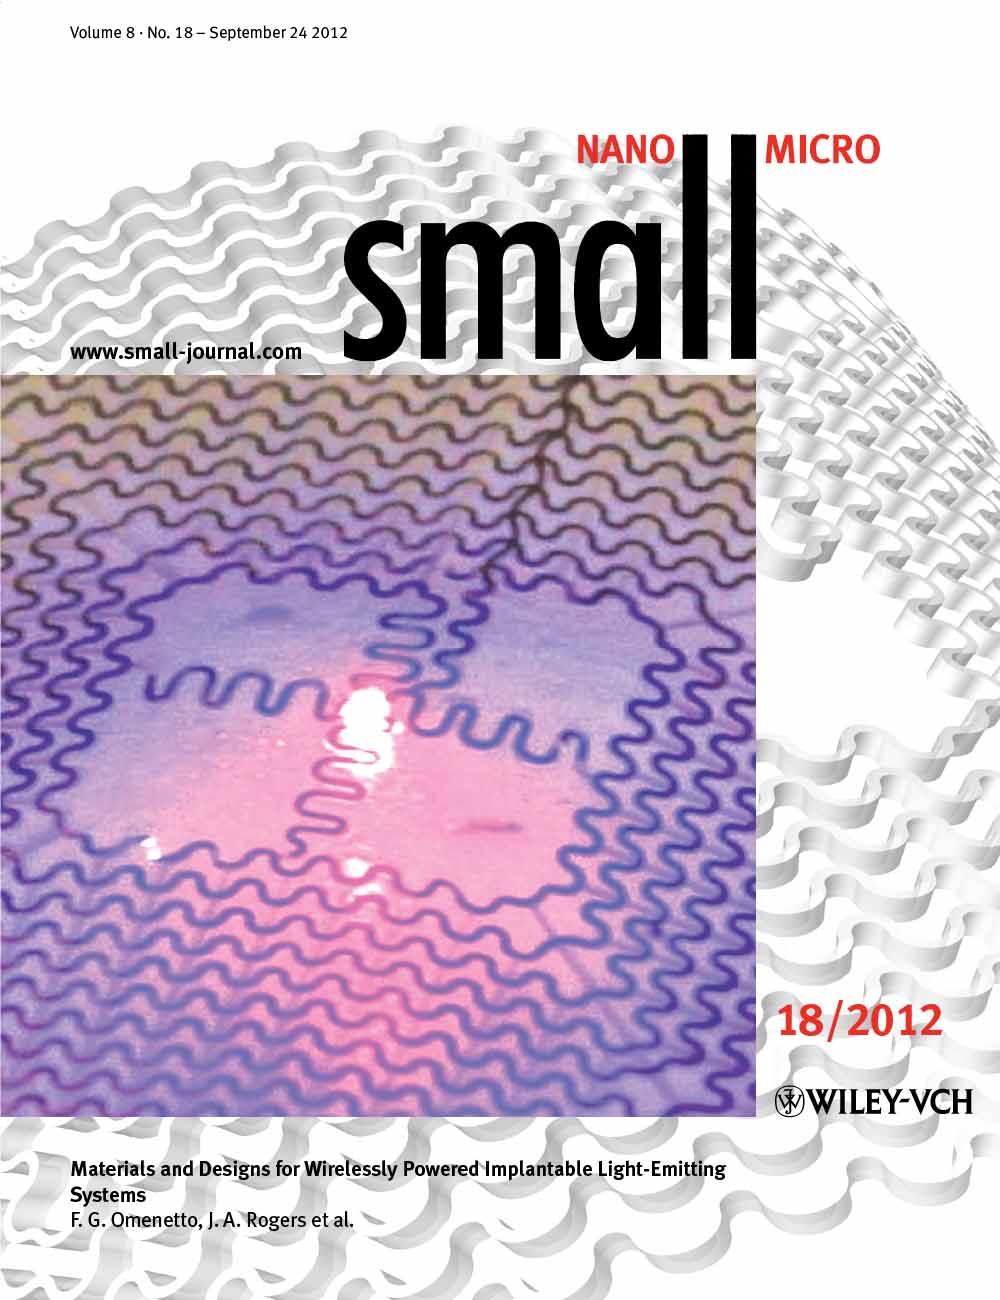 2012 Cover of Small, Volume 8, Issue 18